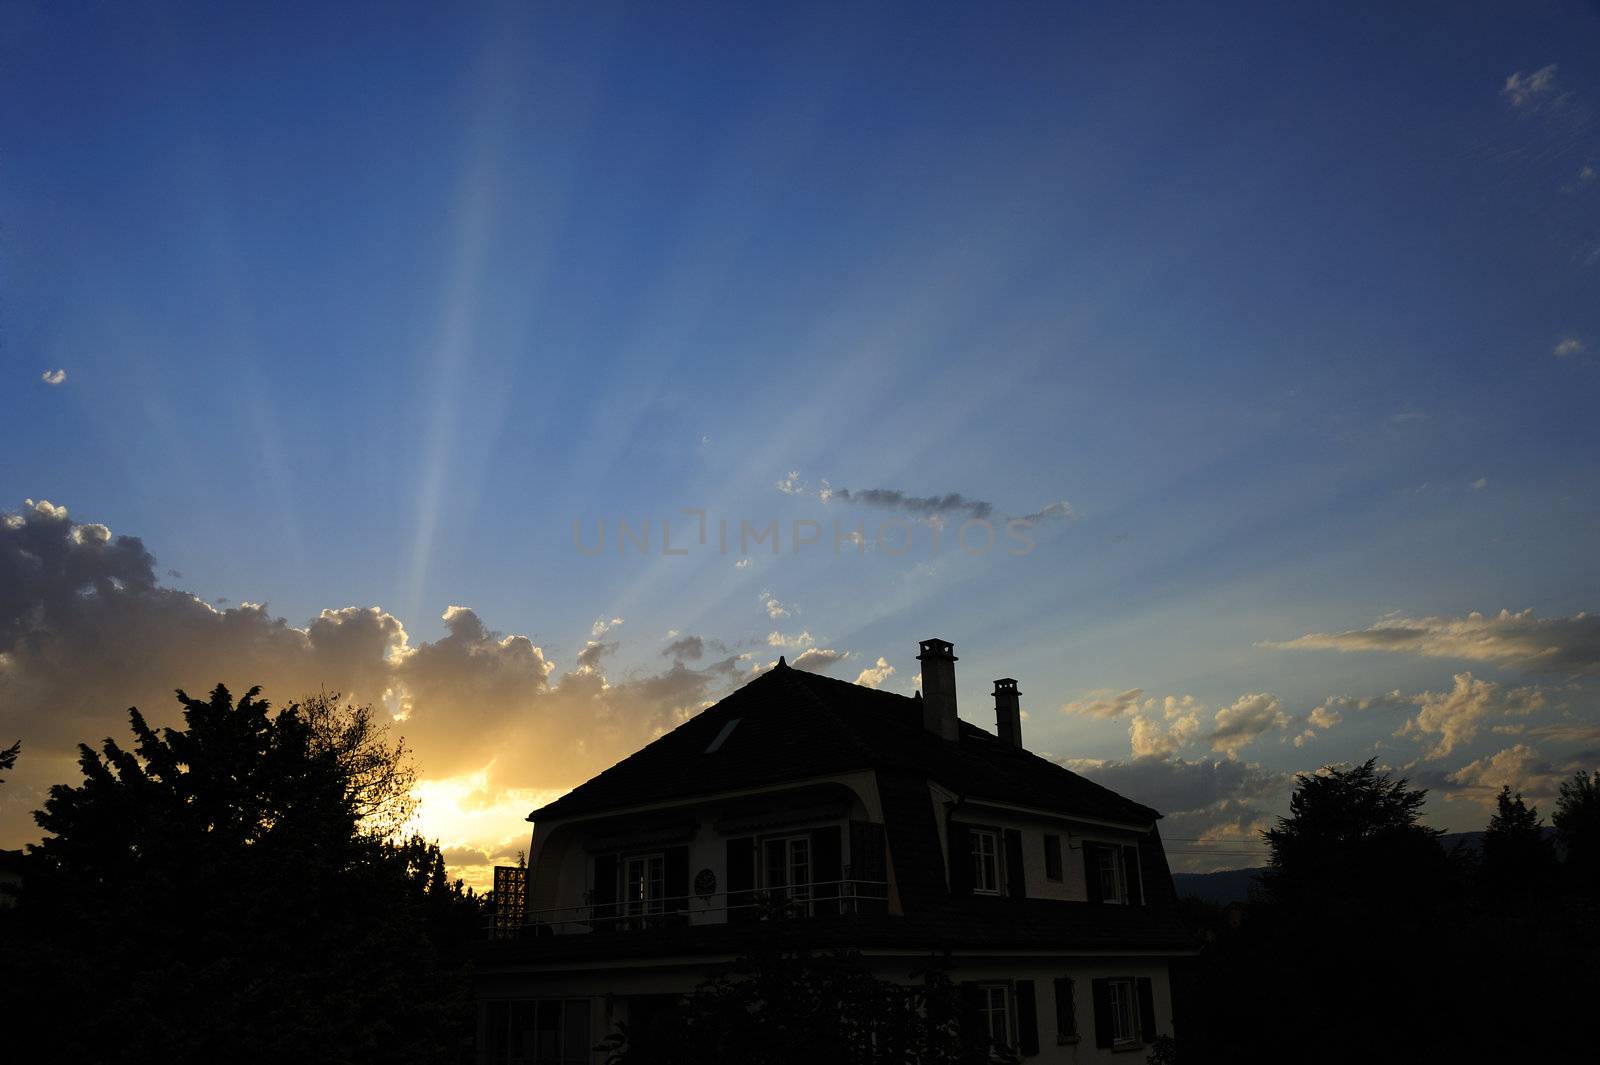 The sun rising over (or setting behind) the silhouette of a house. Crepuscular rays streaming out from behind the clouds. Space for text in the sky.